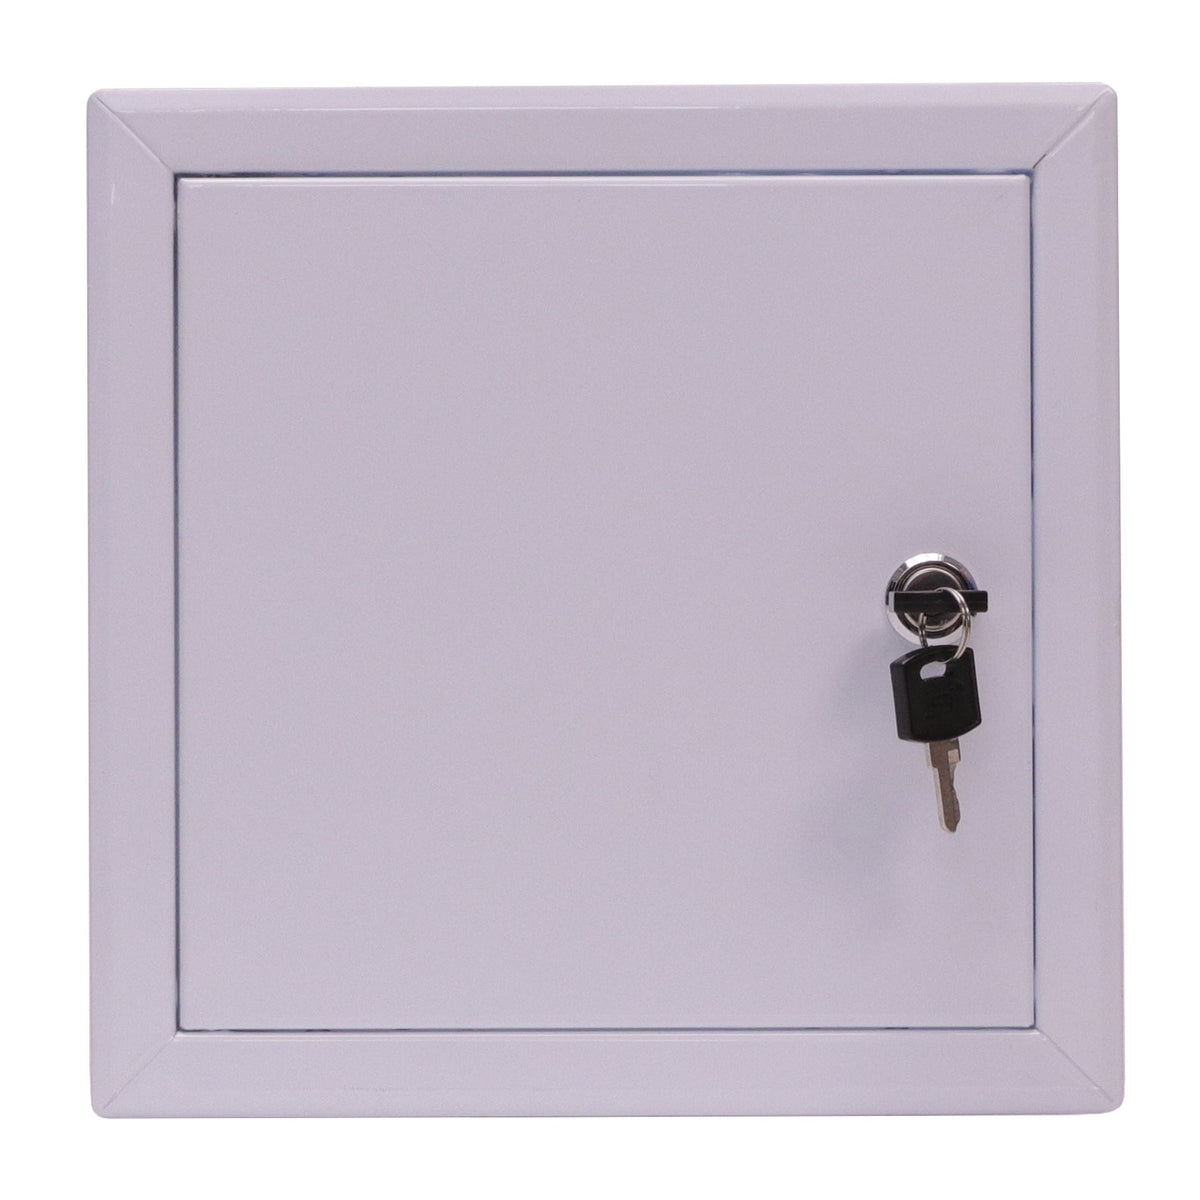 10&quot; X 10&quot; Steel Access Panel Removable Door For Wall / Ceiling Application (Lock and Key) With Frame - [Outer Dimensions: 11&quot; Width X 11&quot; Height]